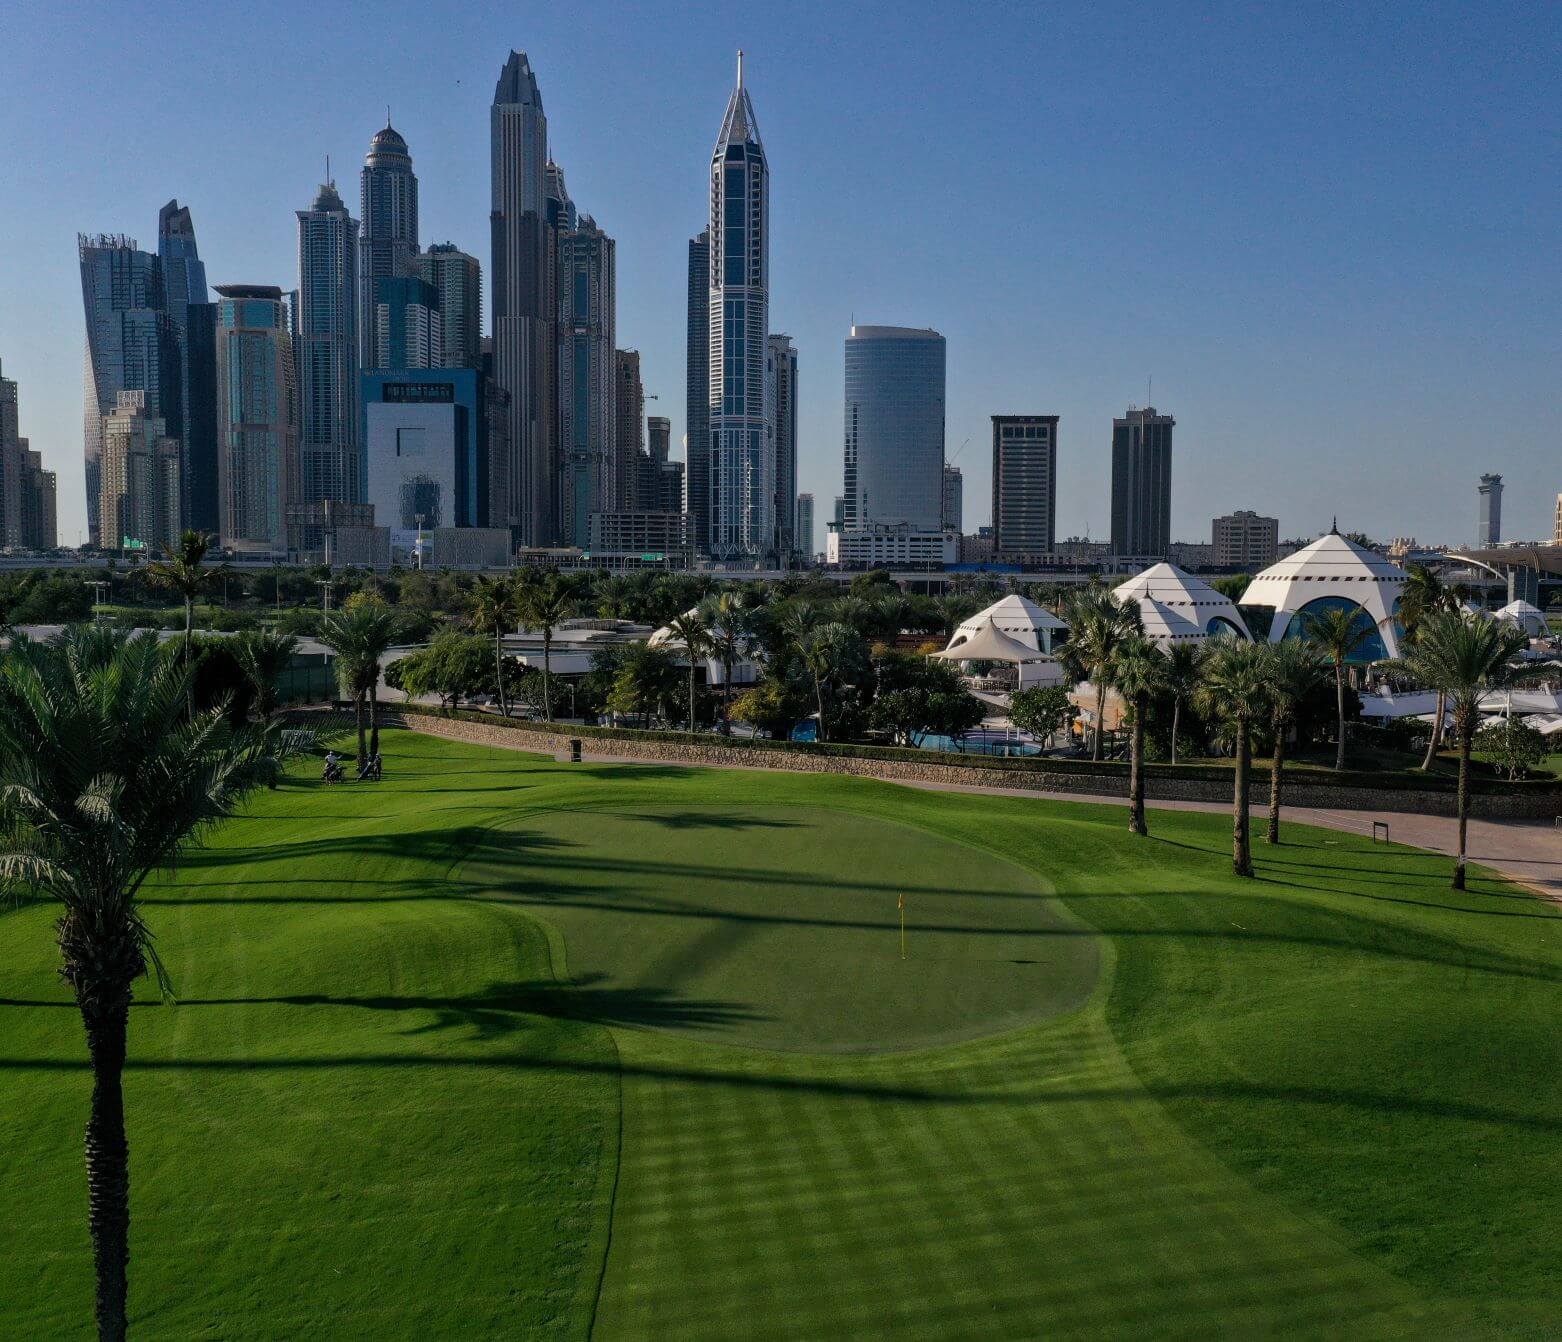 Blue skies and green fairway with clubhouse in the distance overlooked by skyline at Majilis Golf Course at Emirates Golf Club